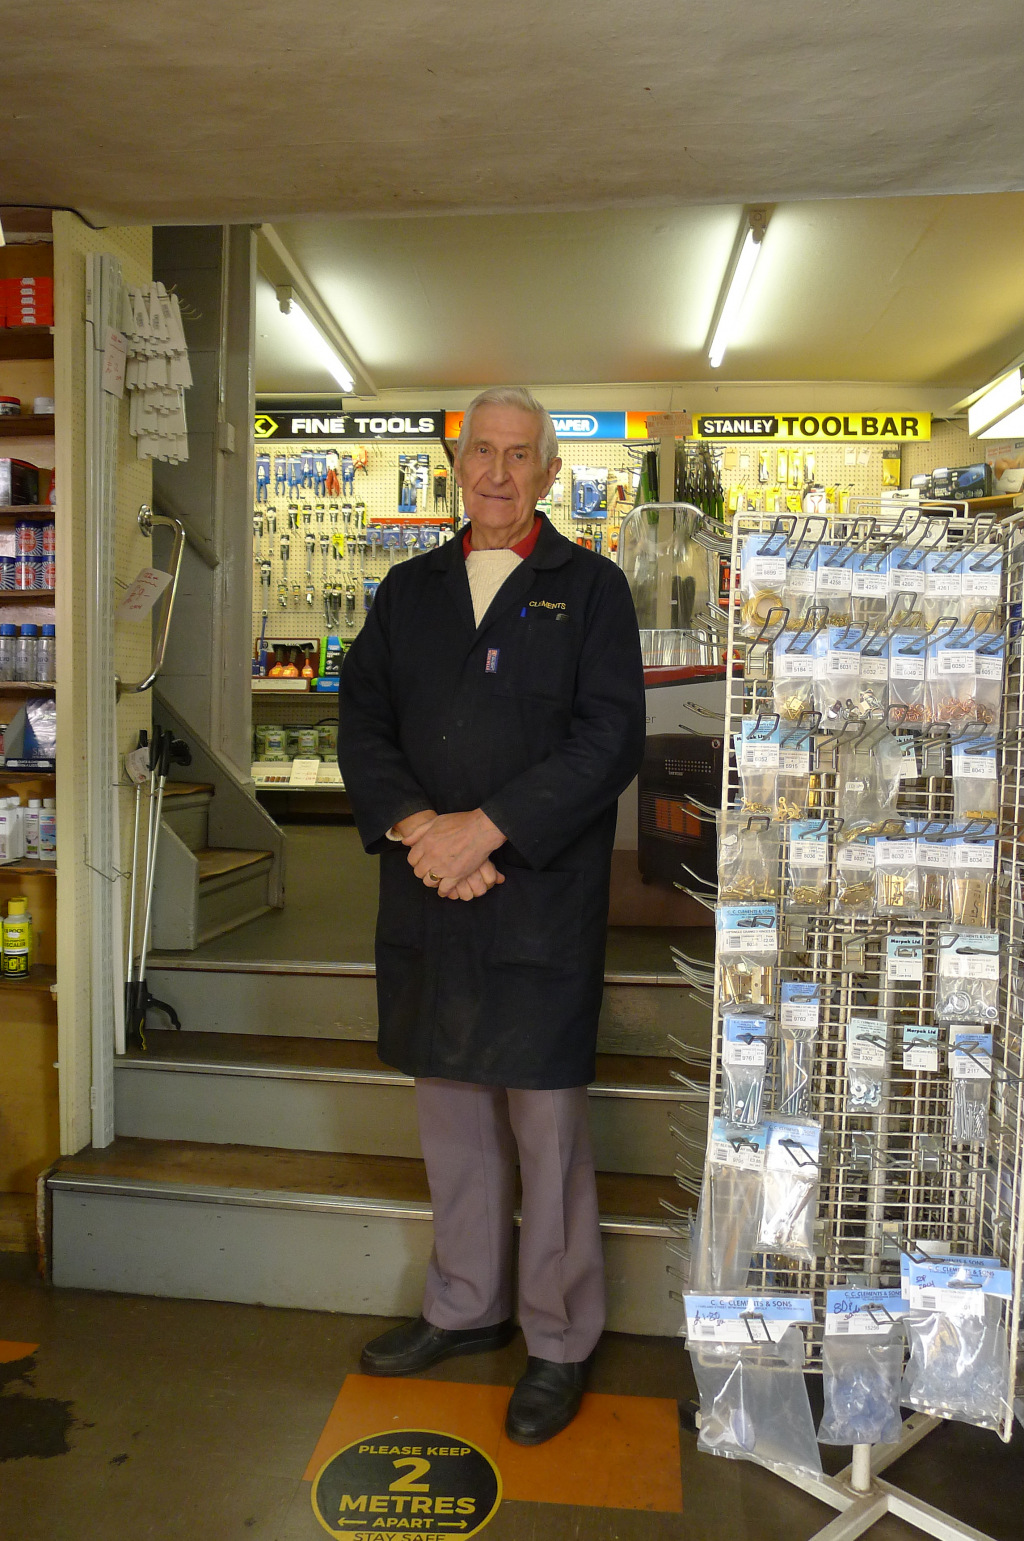 George standing in shop